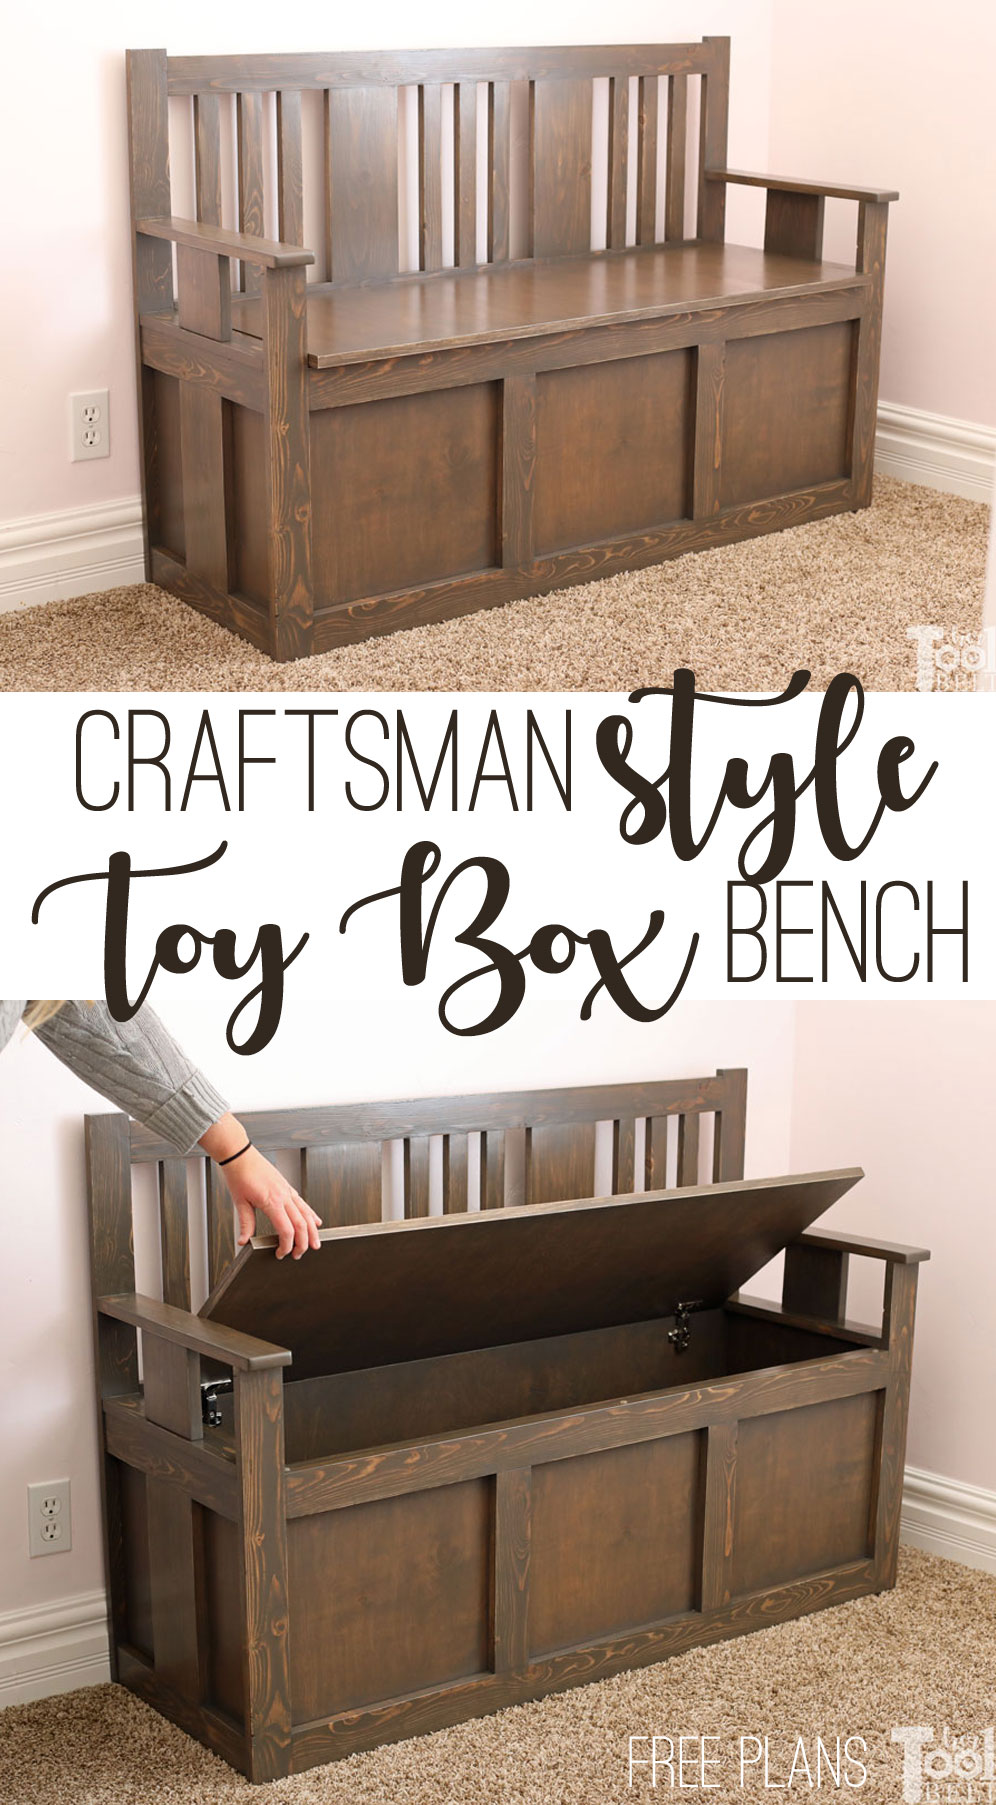 Craftsman Toy Box Bench Her Tool Belt, Wooden Toy Box Bench Seat